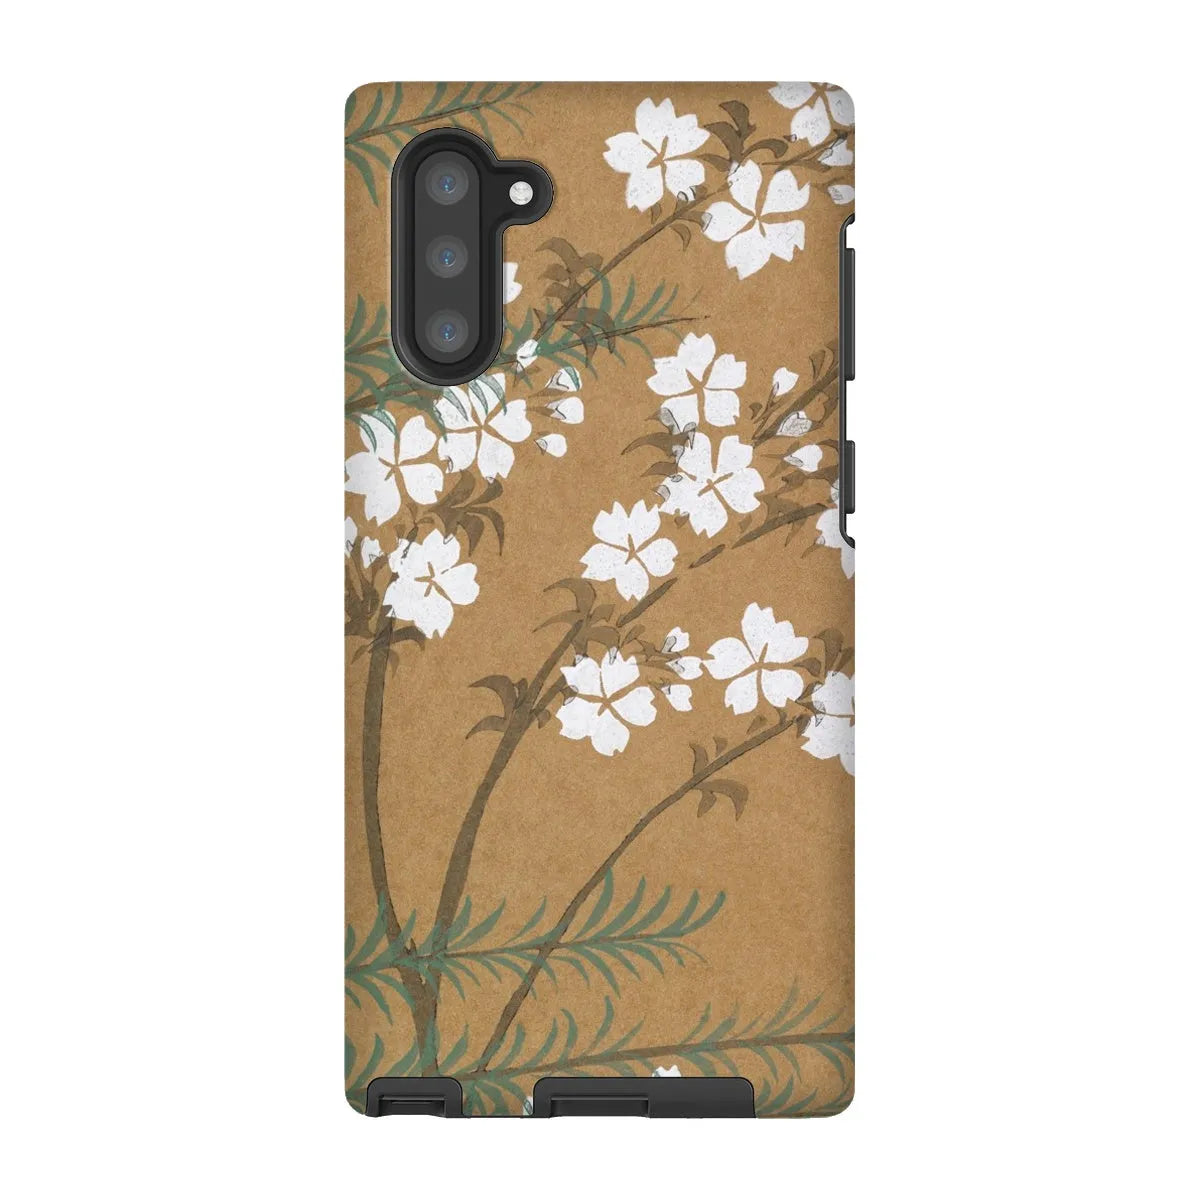 Blossoms From Momoyogusa Floral Phone Case - Kamisaka Sekka - Samsung Galaxy Note 10 / Matte - Mobile Phone Cases